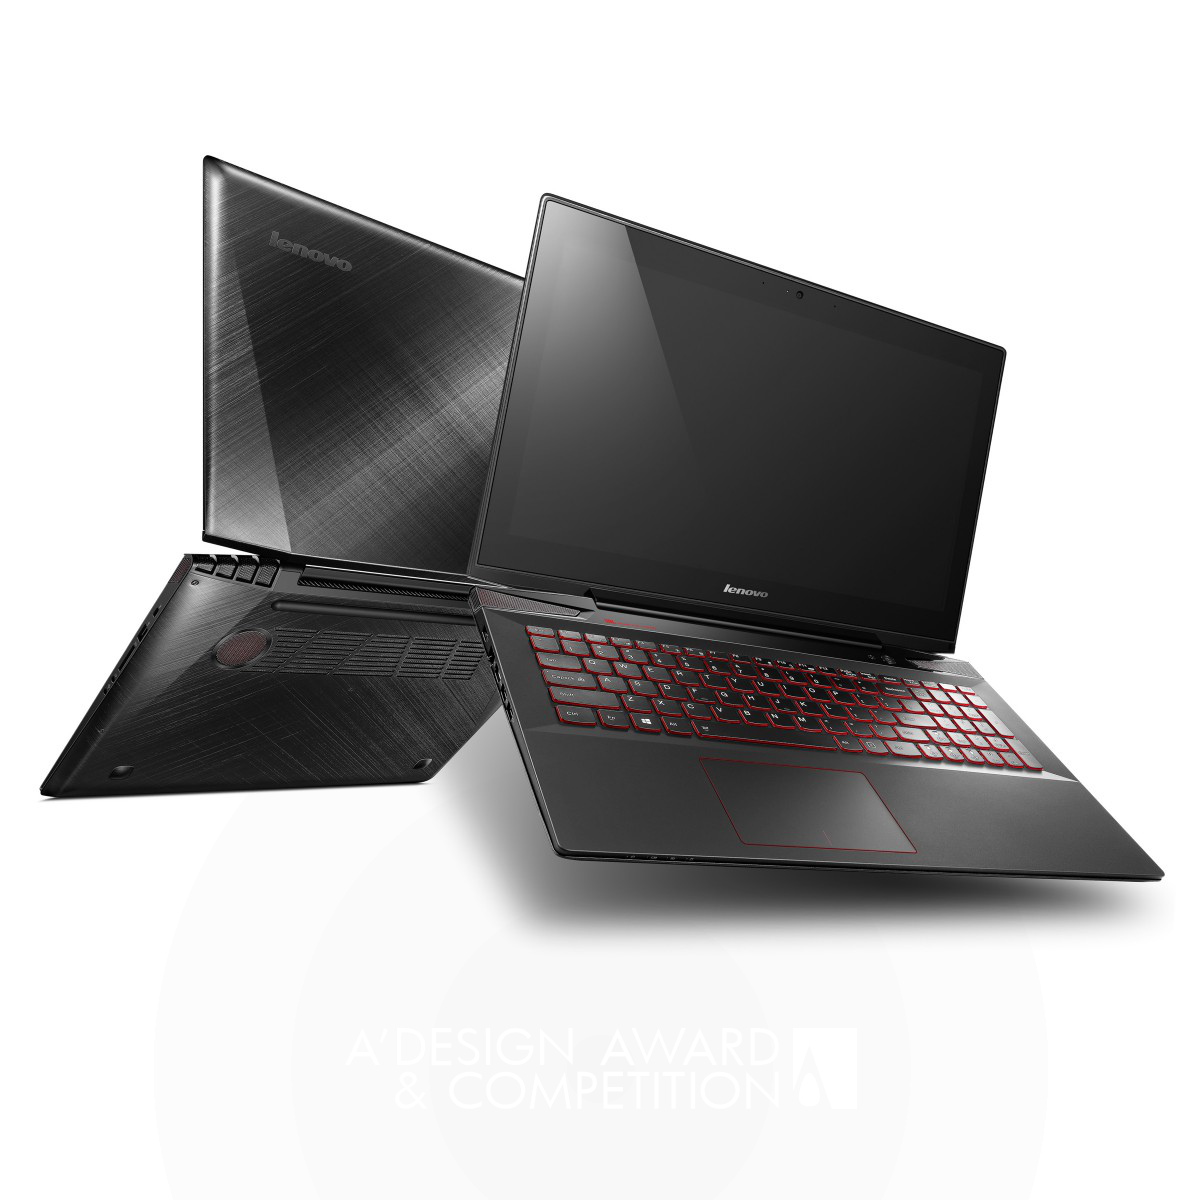 Lenovo Y70 Laptop by Lenovo Silver Digital and Electronic Device Design Award Winner 2015 